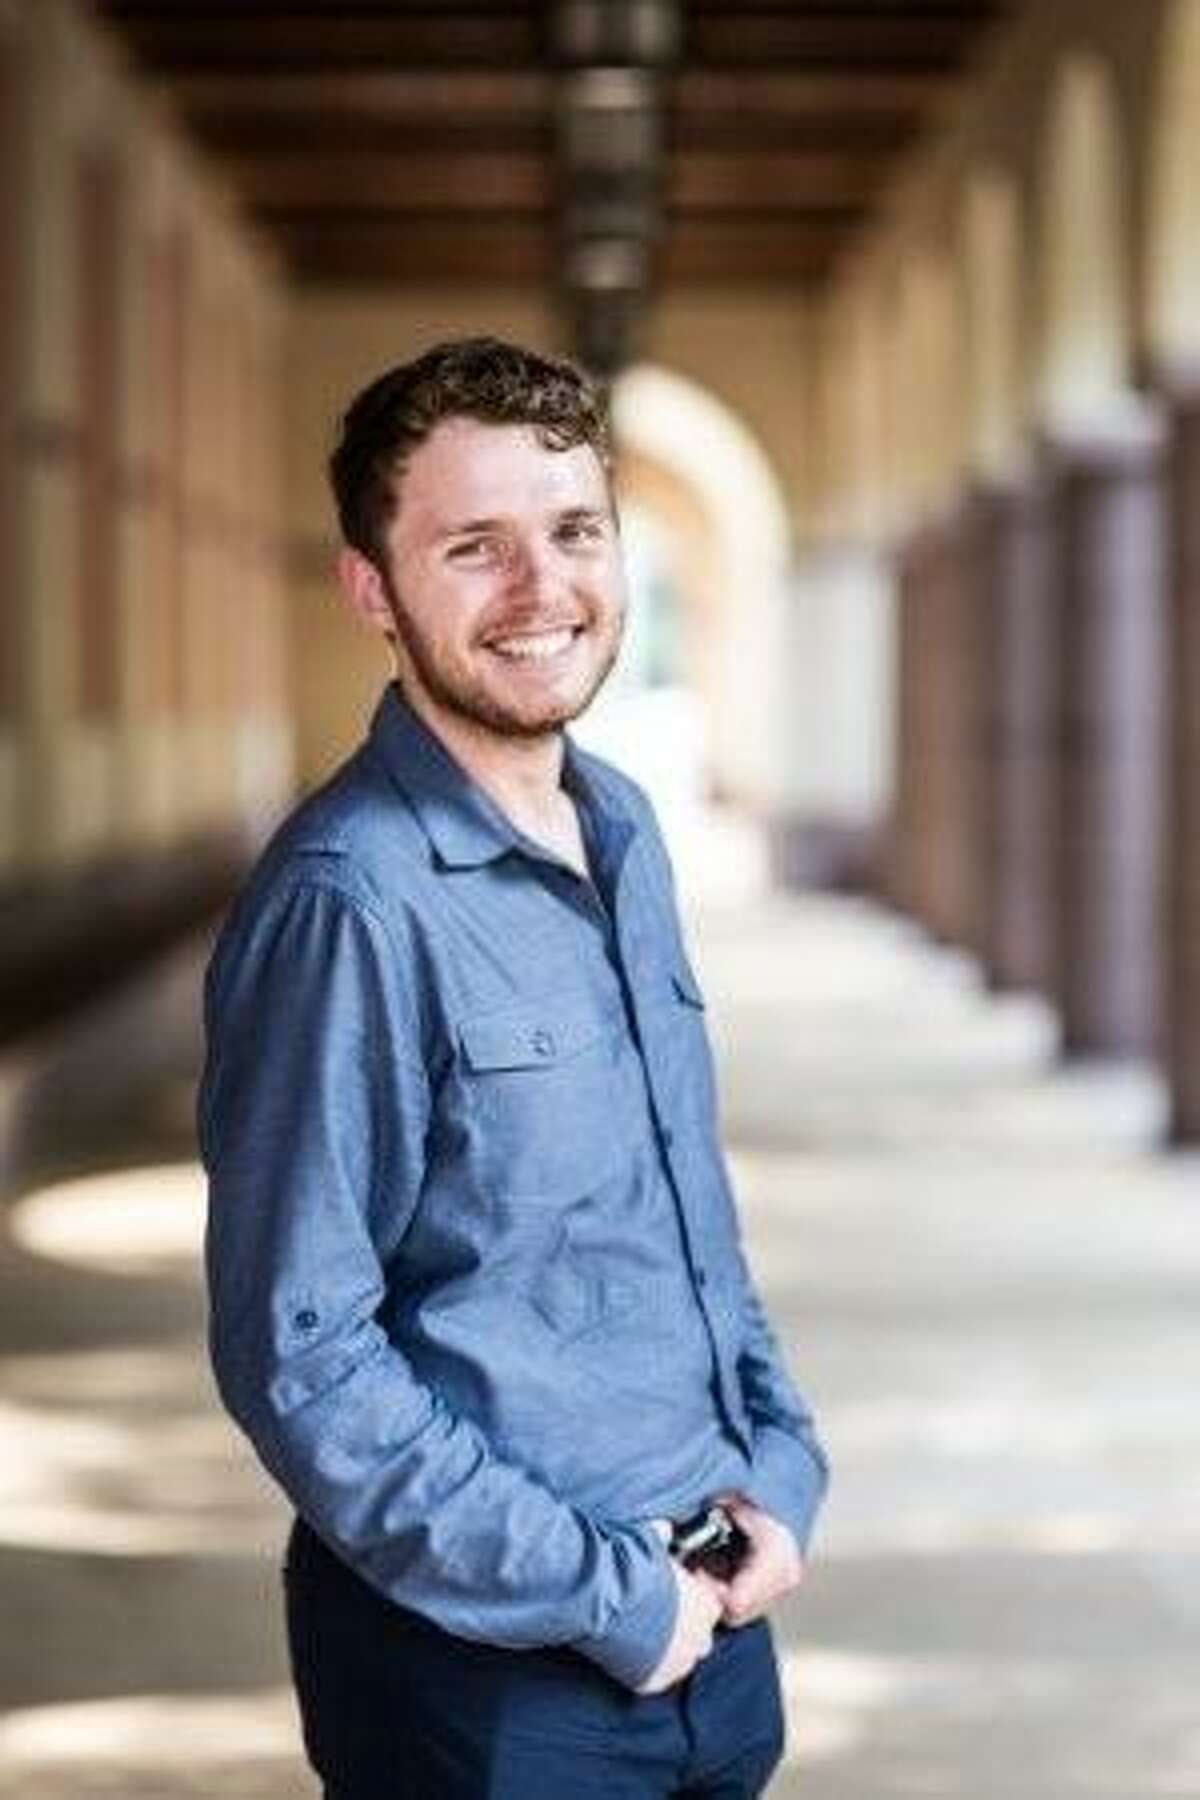 Dakota Stormer, 24, is the founder and CEO of Footprint LLC and said he hopes to encourage people to make positive changes in their lives using the Footprint app, which is set to launch during the first week of August.